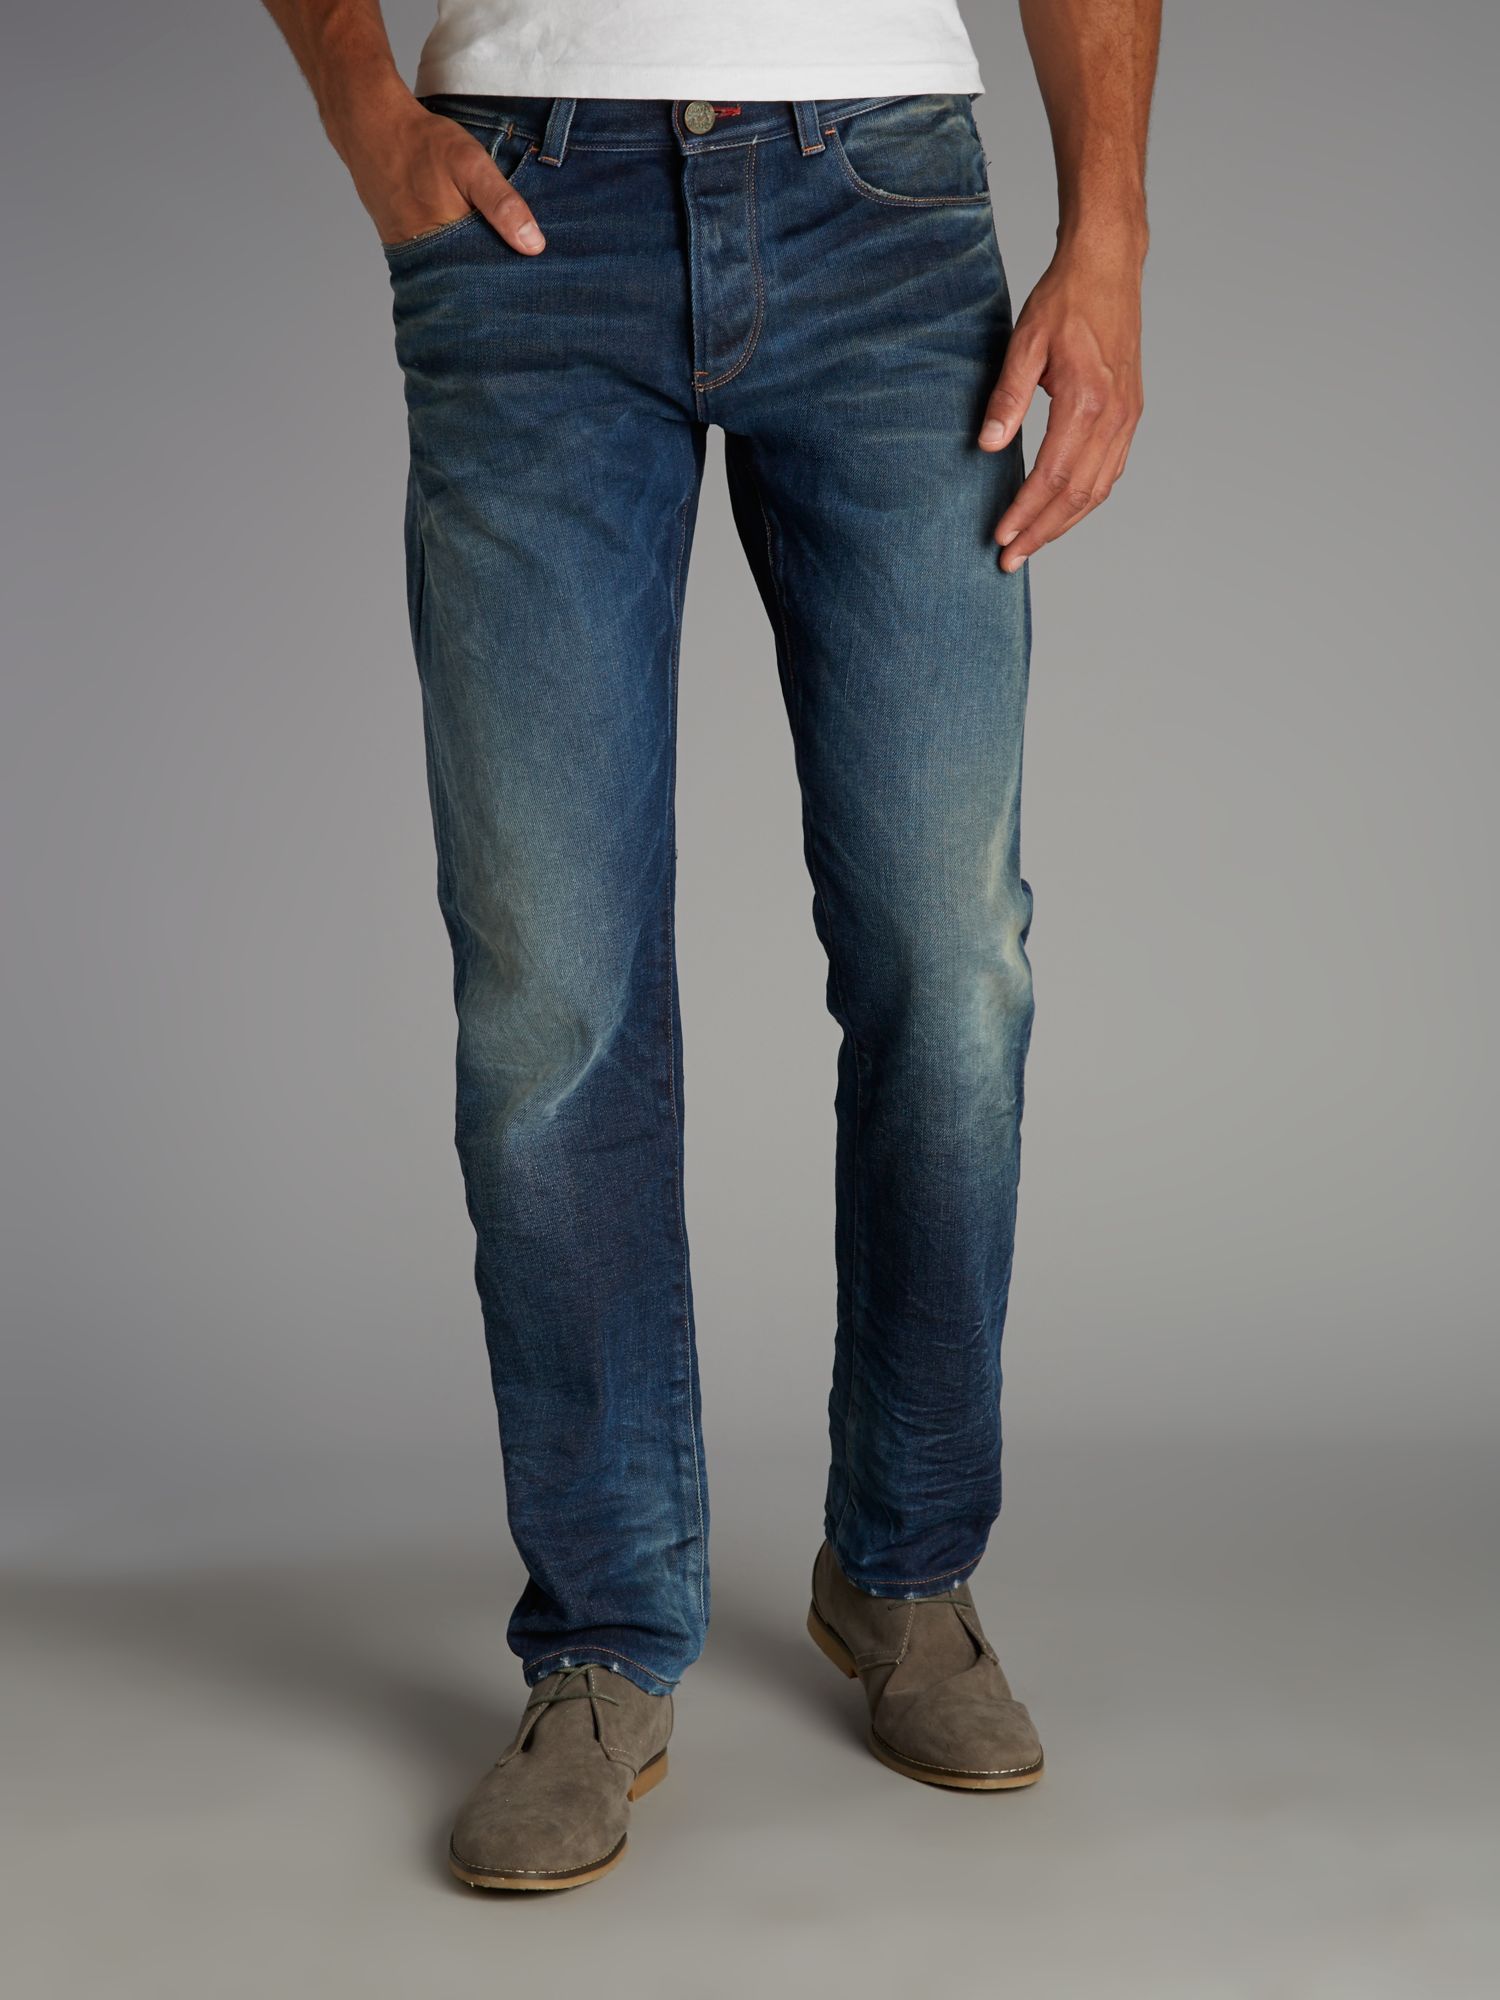 Armani jeans Made in Italy Light Wash Jeans in Blue for Men | Lyst